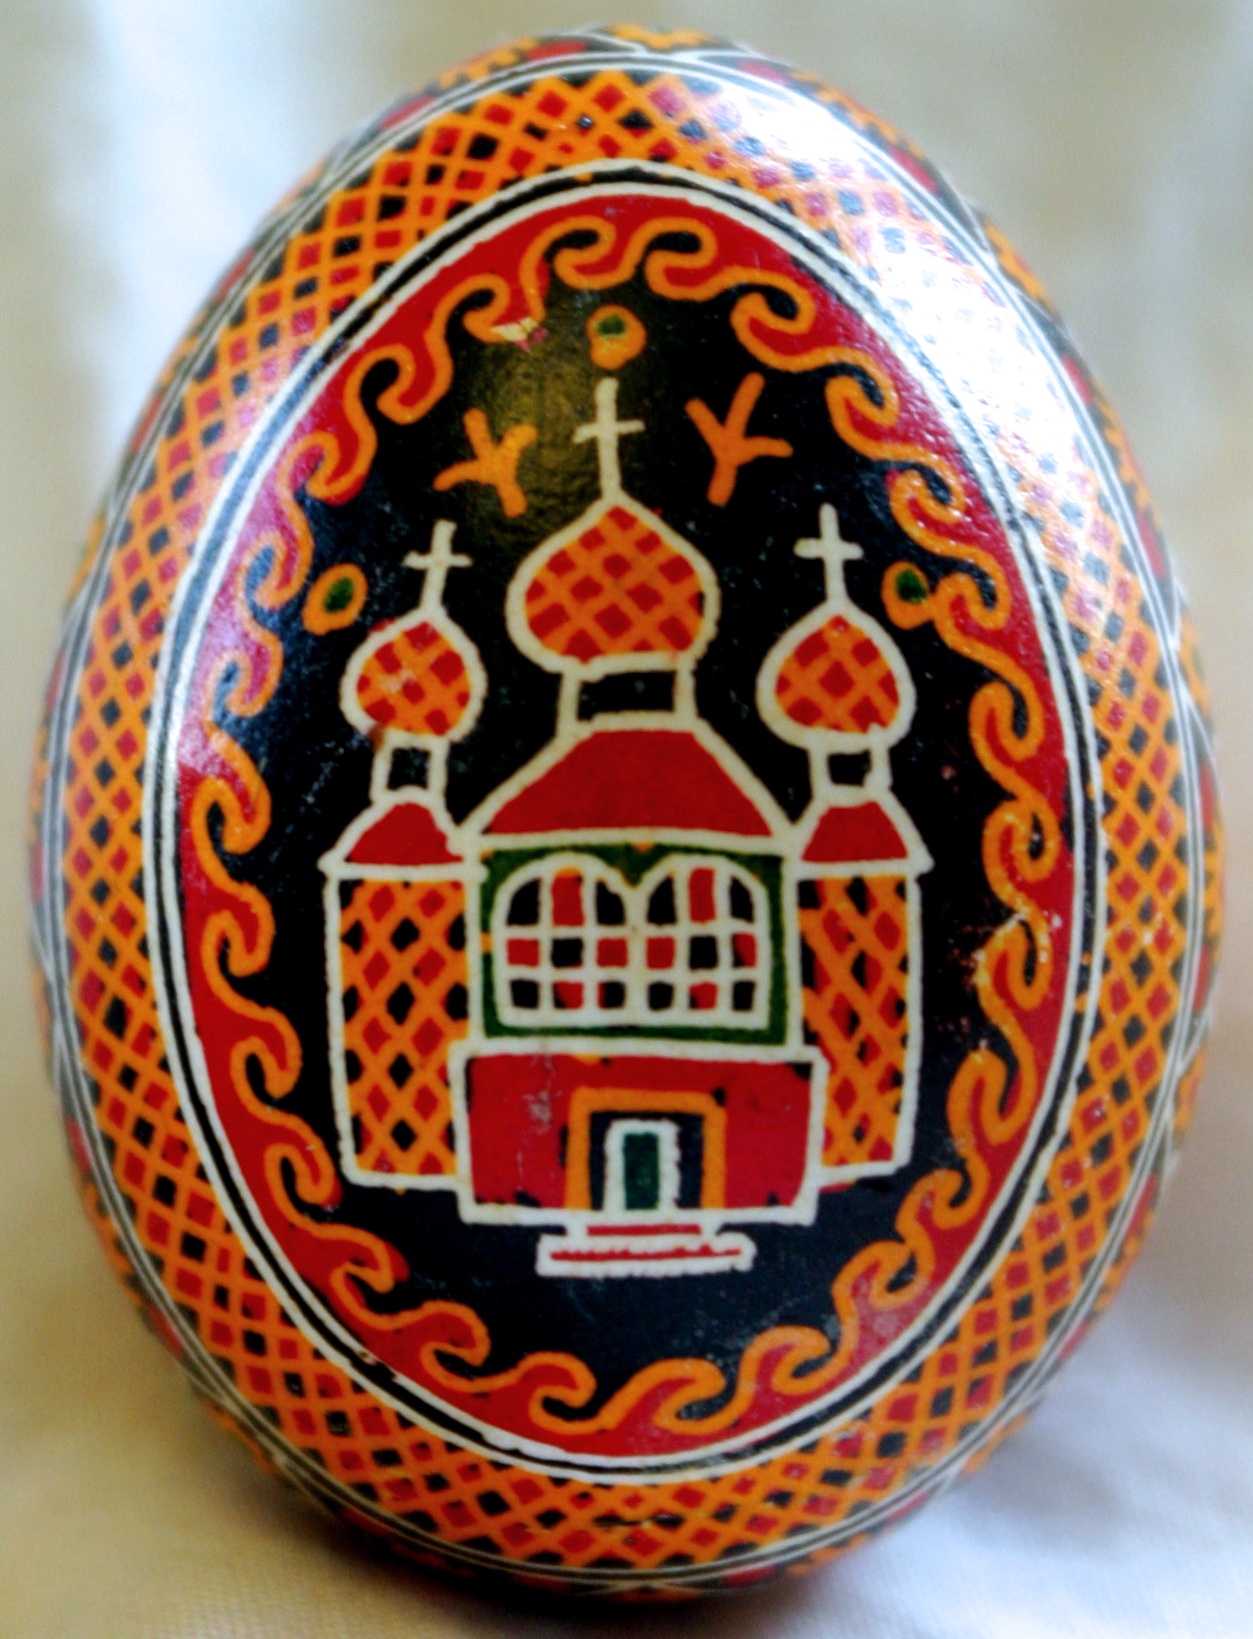 An example of a traditional Ukrainian pysanka from the village of Kosmach in Ivano-Frankivsk. (By Lubap - Own work, CC BY-SA 4.0, https://commons.wikimedia.org/w/index.php?curid=38546959)